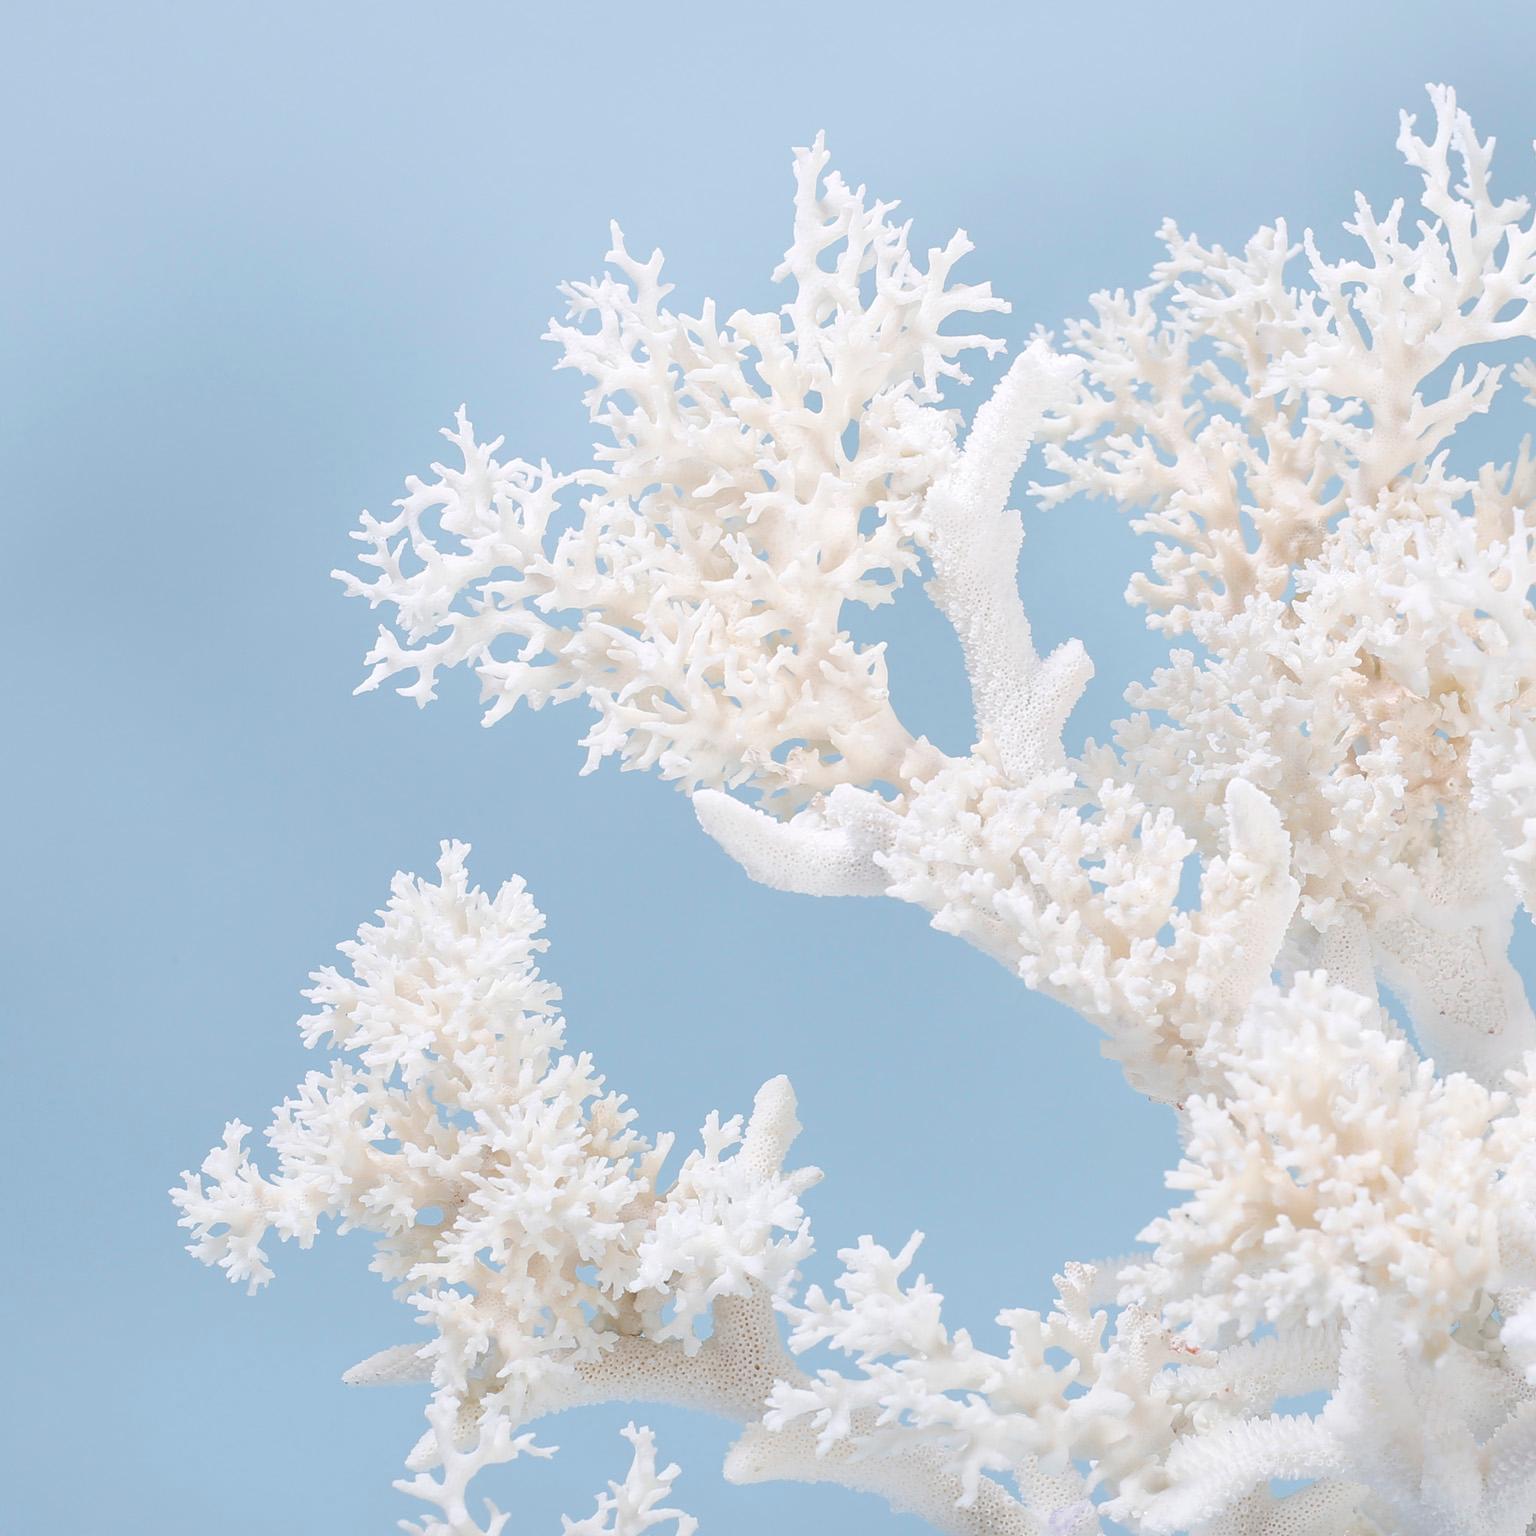 Dazzling one of a kind white coral sculpture composed in a dramatic structure of bleached white branch and table coral with an unusual combination of sea inspired textures. Presented on a Lucite base.

Coral being exported outside of the USA,